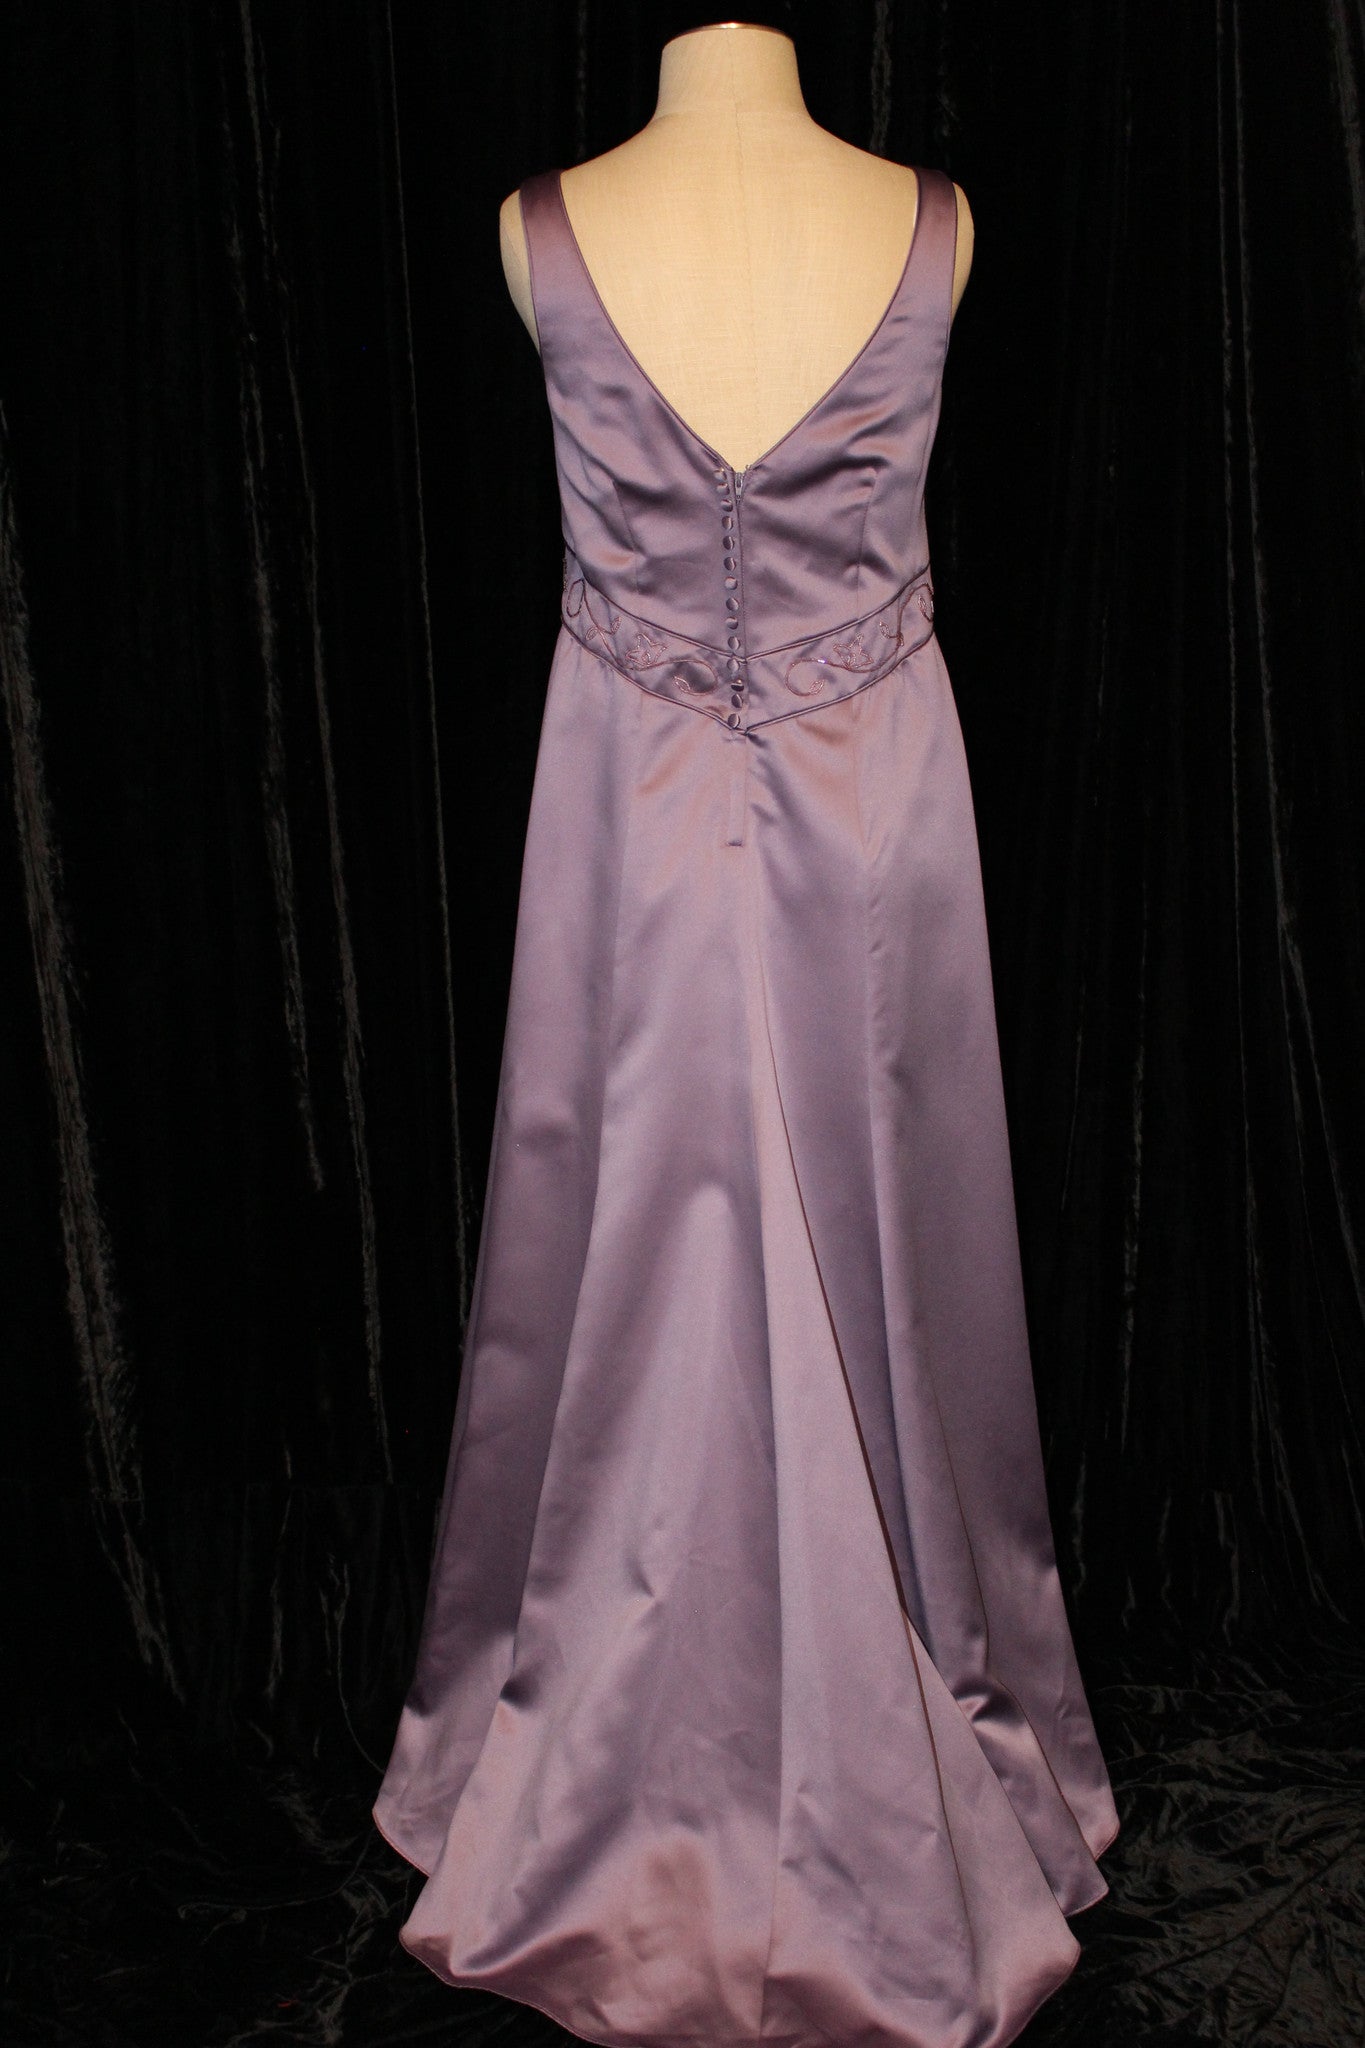 Wisteria "Michael Angelo" Gown 187